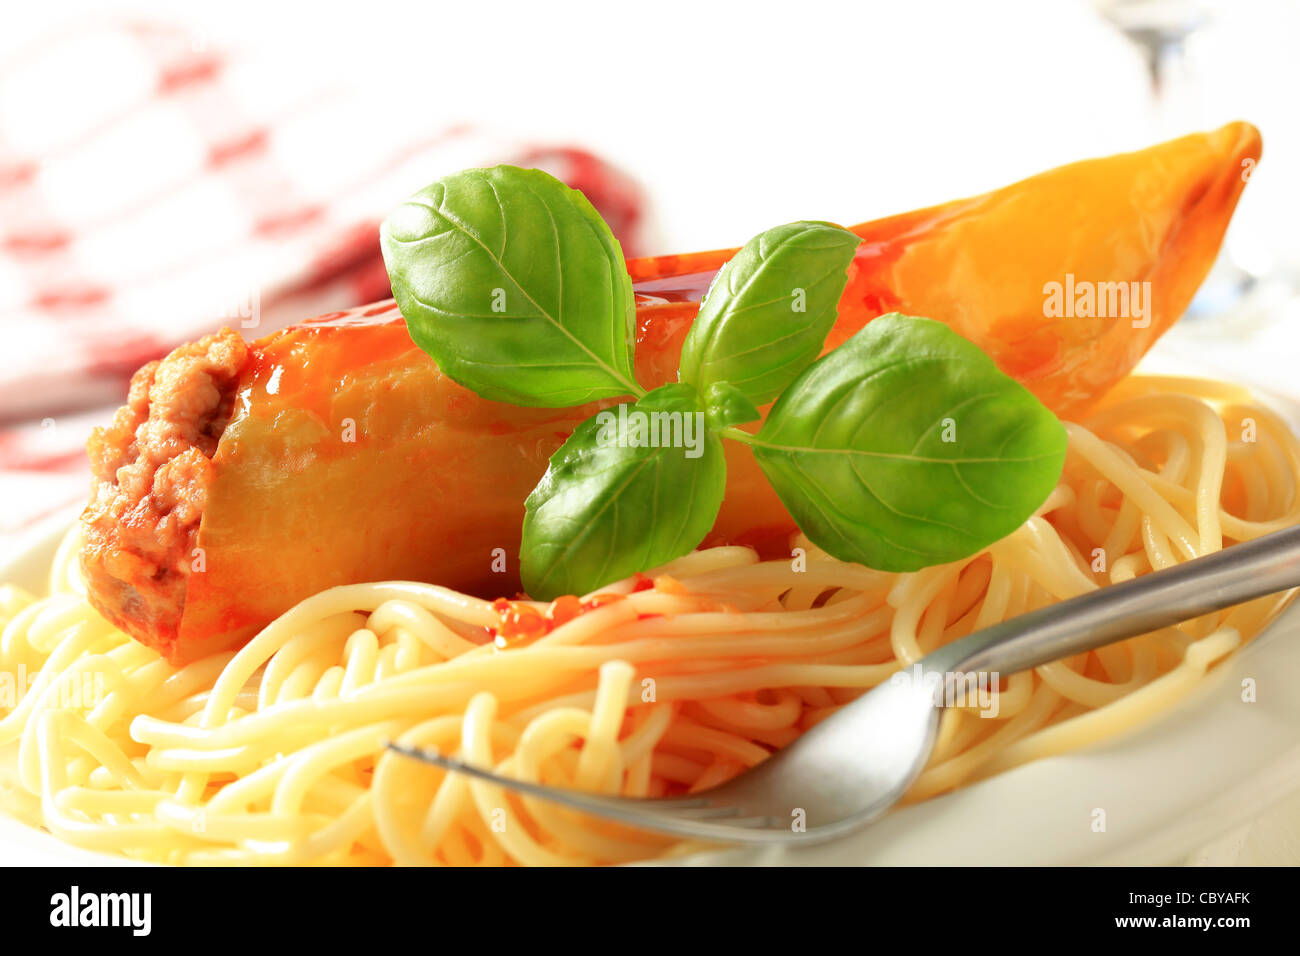 Hungarian pepper stuffed with minced meat served with spaghetti Stock Photo